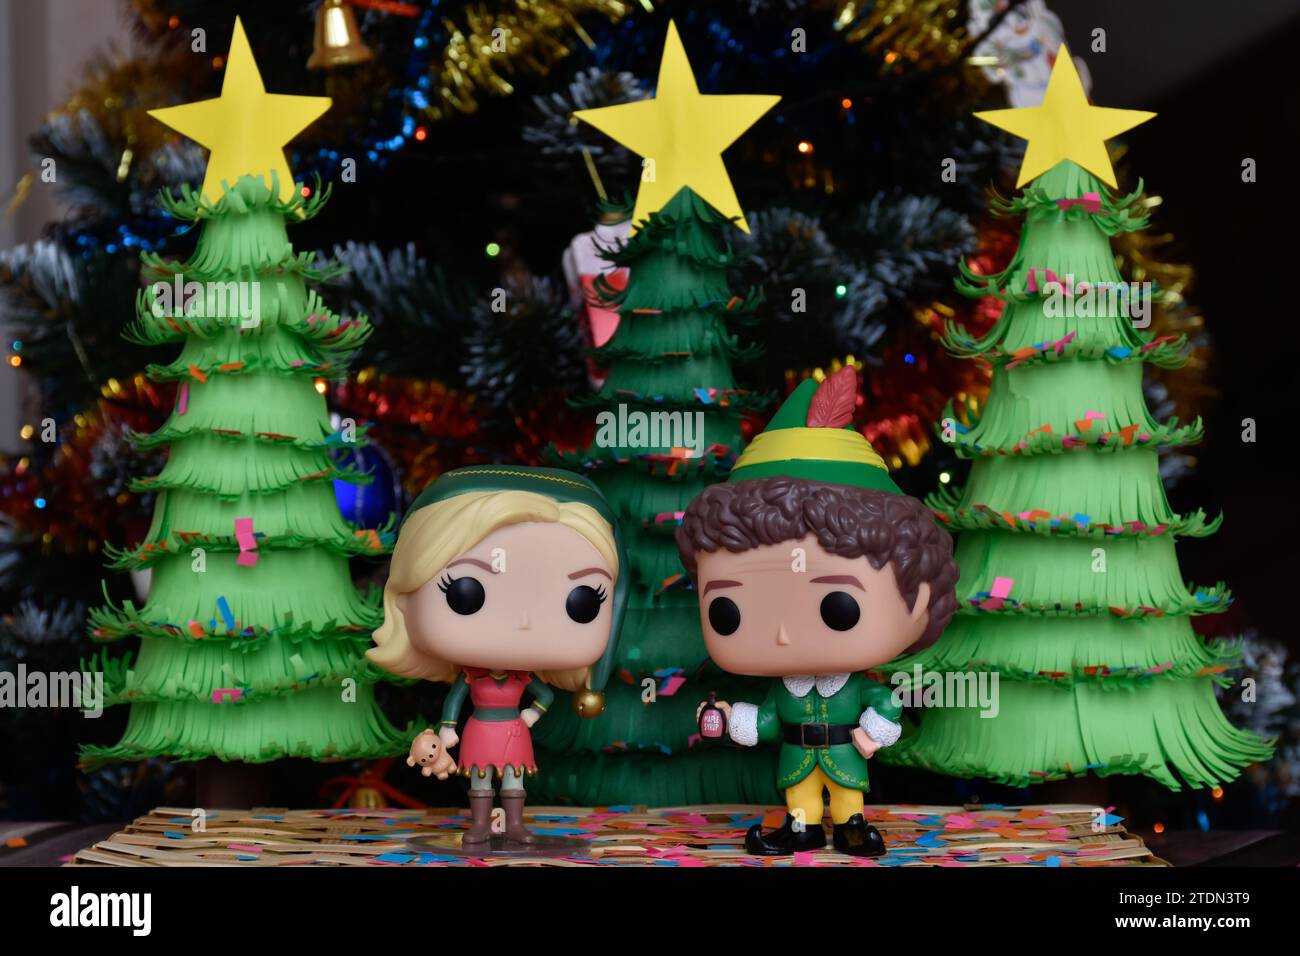 Funko Pop action figures of Jovie and Buddy from family comedy movie Elf. Handmade paper Christmas trees, ornaments, confetti, garland, festive decor. Stock Photo